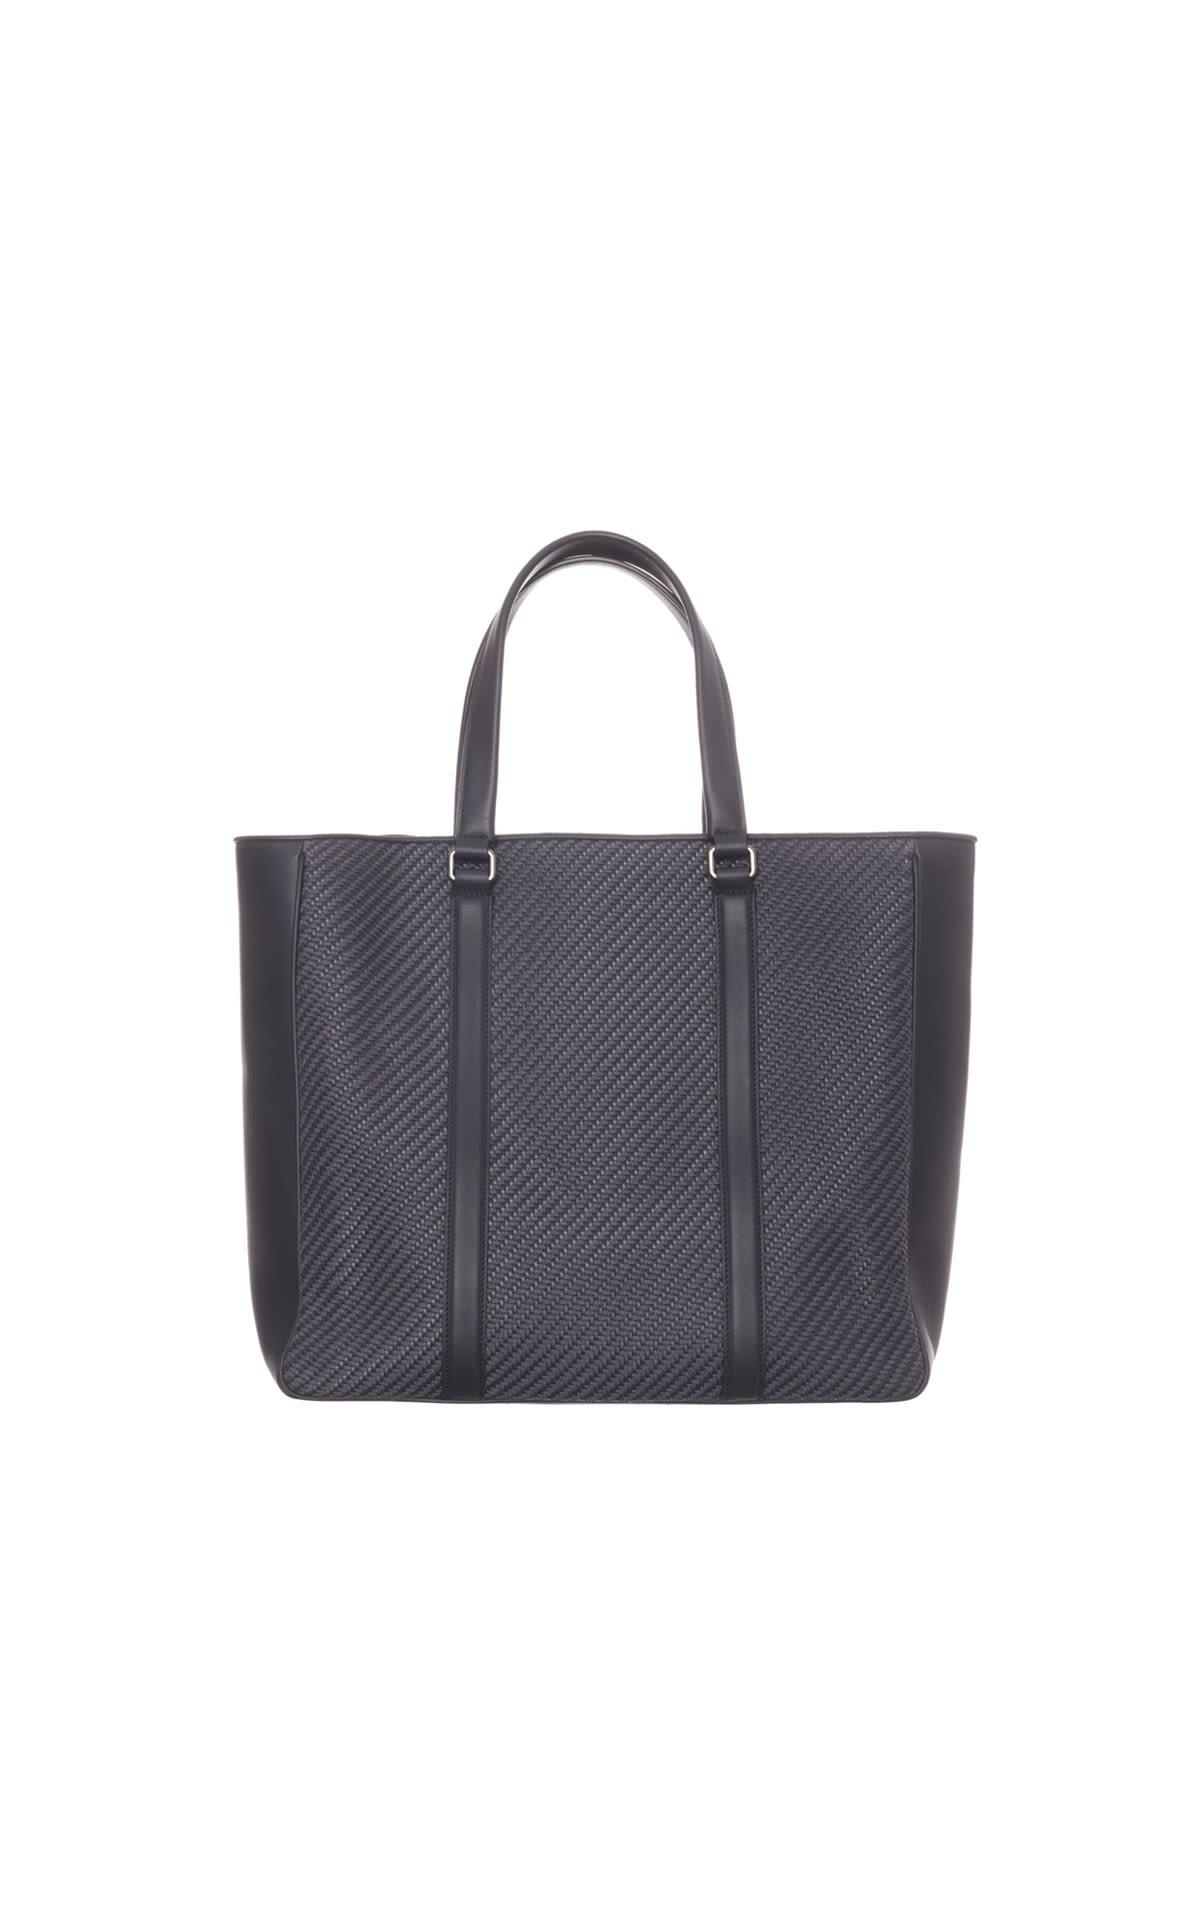 Zegna Leather tote from Bicester Village